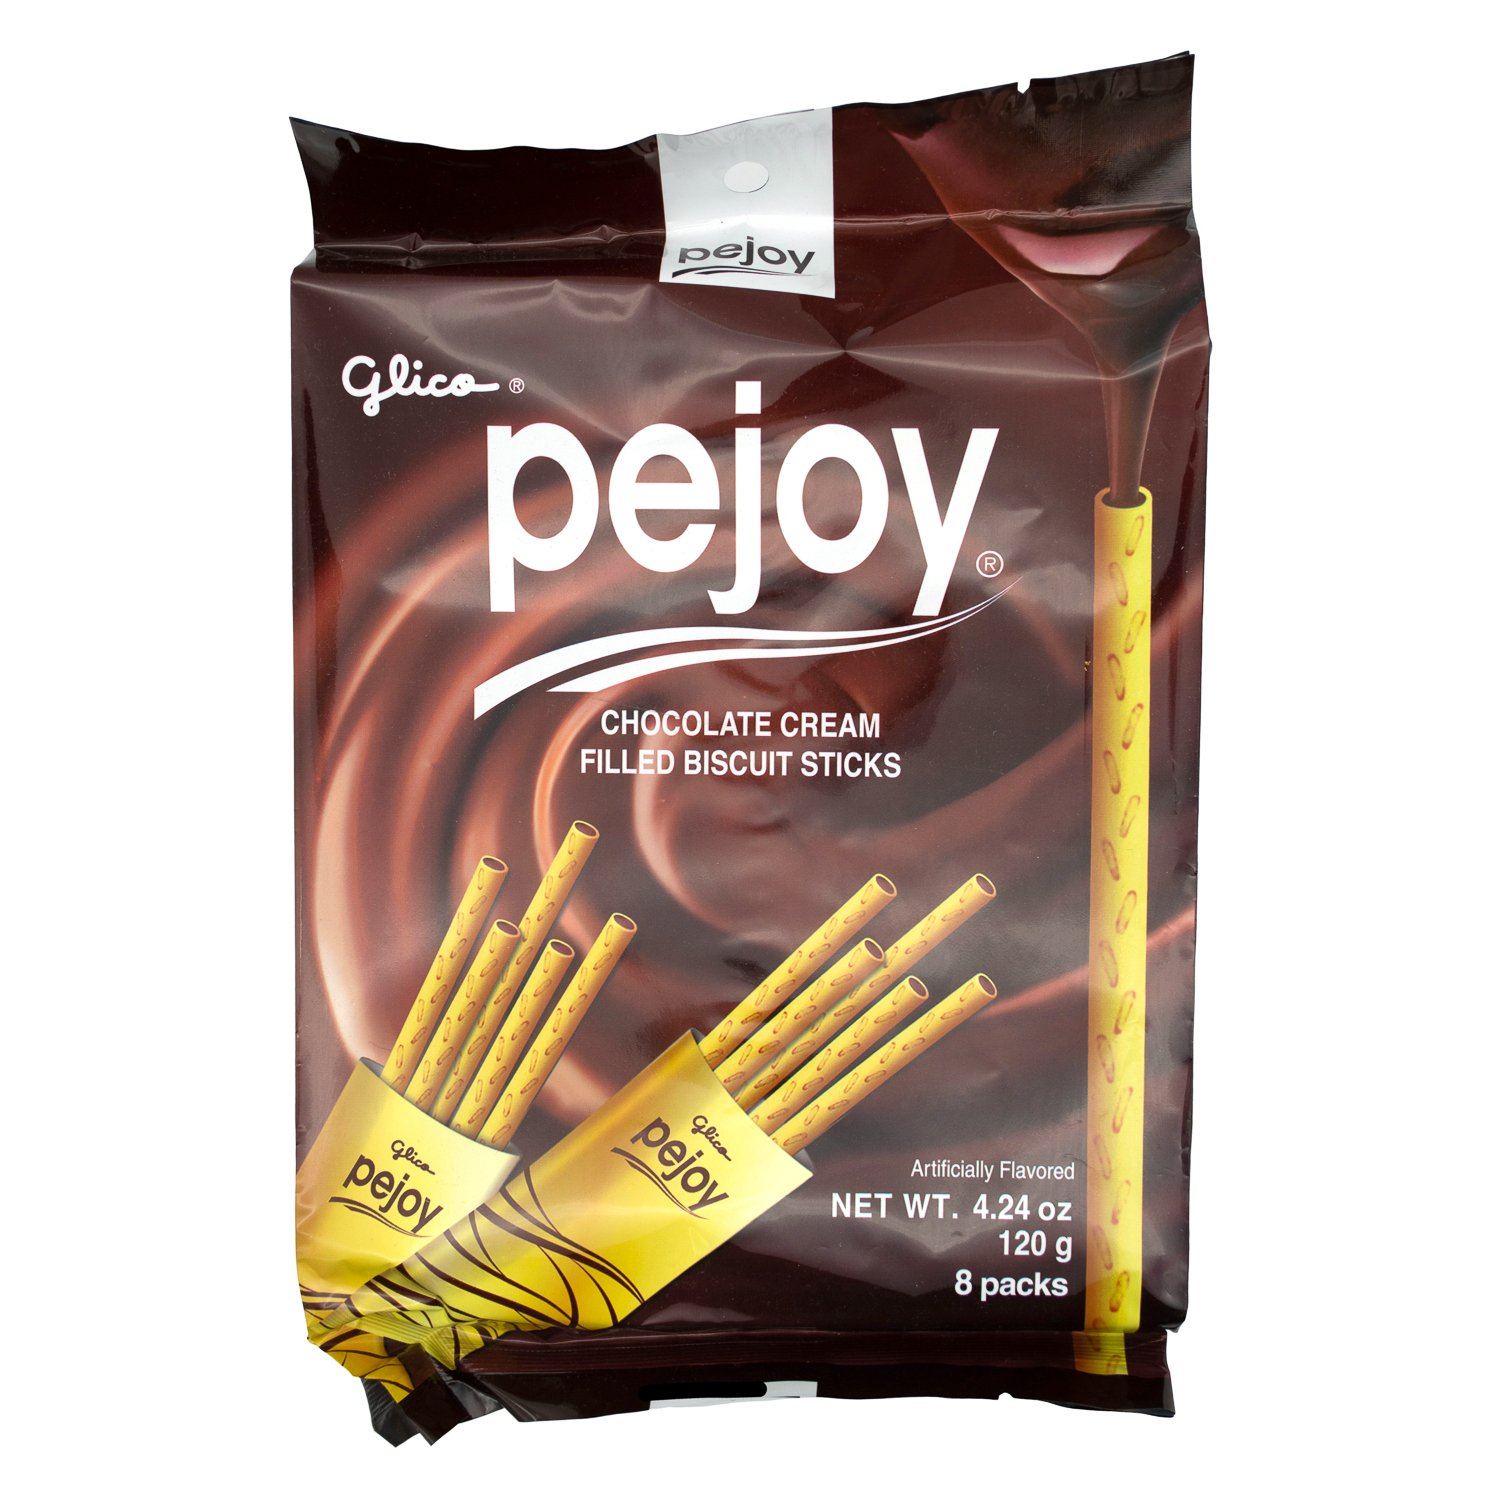 Pejoy Cream Filled Biscuit Sticks Glico Chocolate 4.24 Ounce 